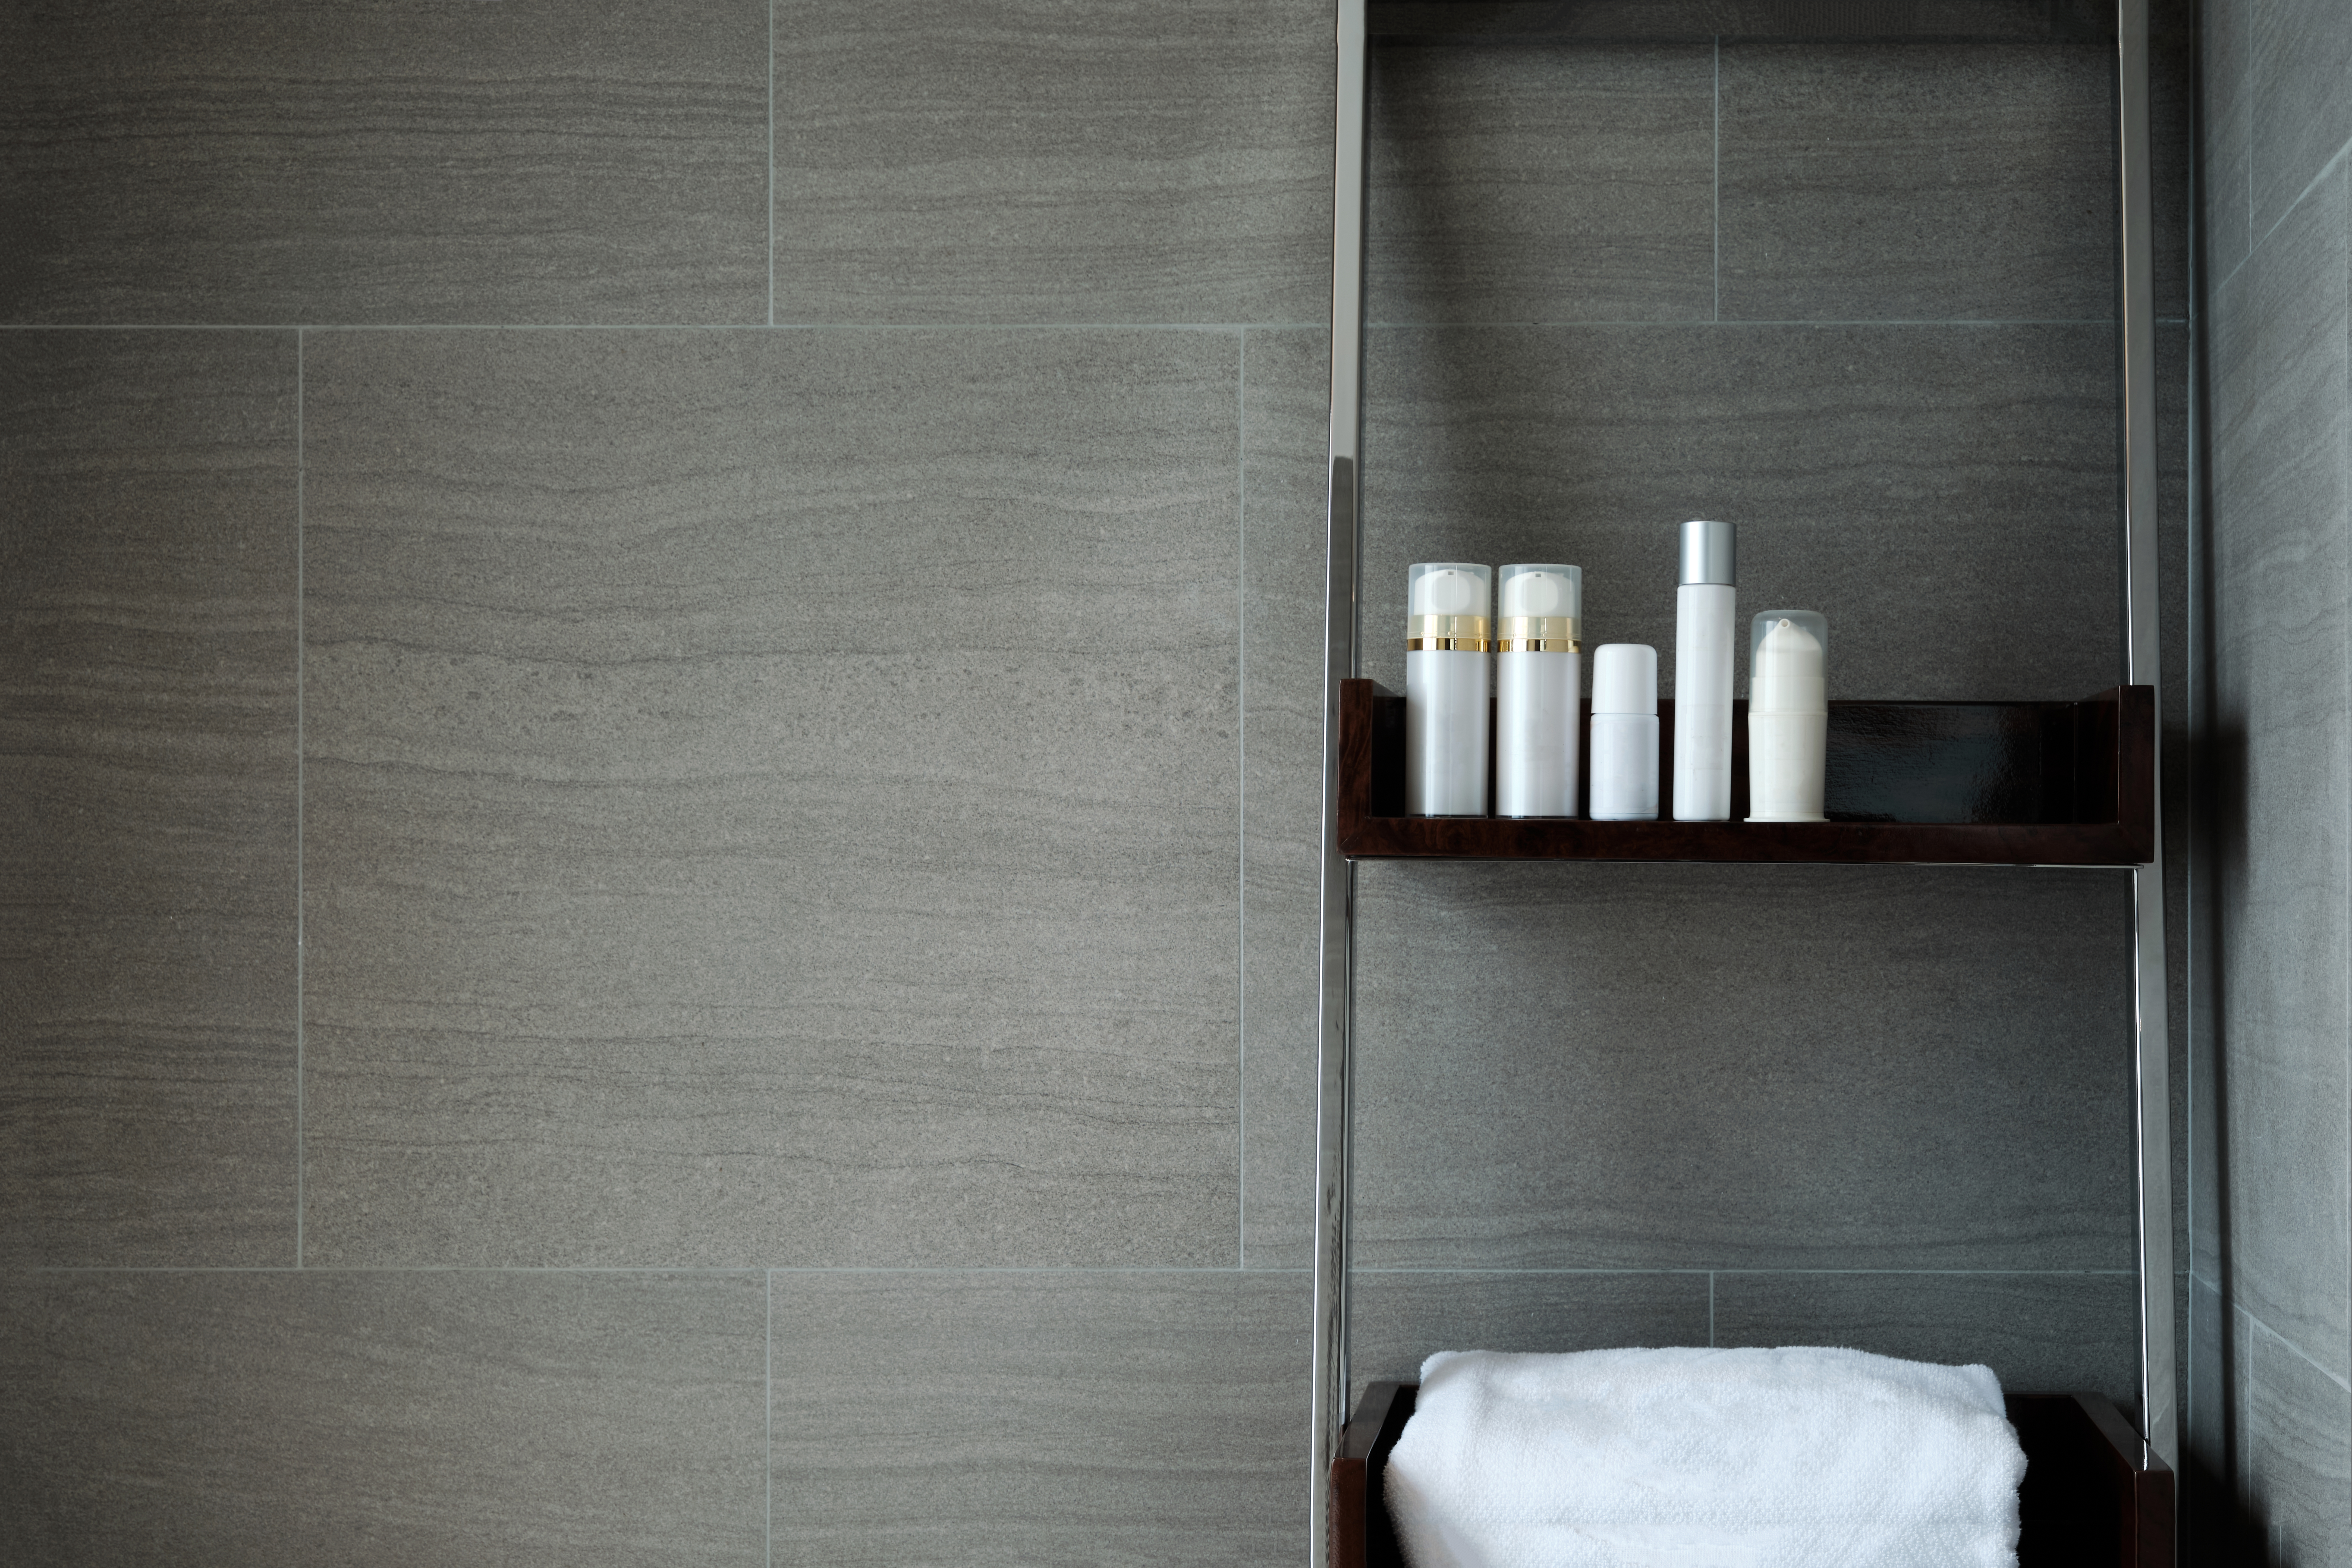 Gray matte porcelain tiles in a bathroom | Source: Getty Images